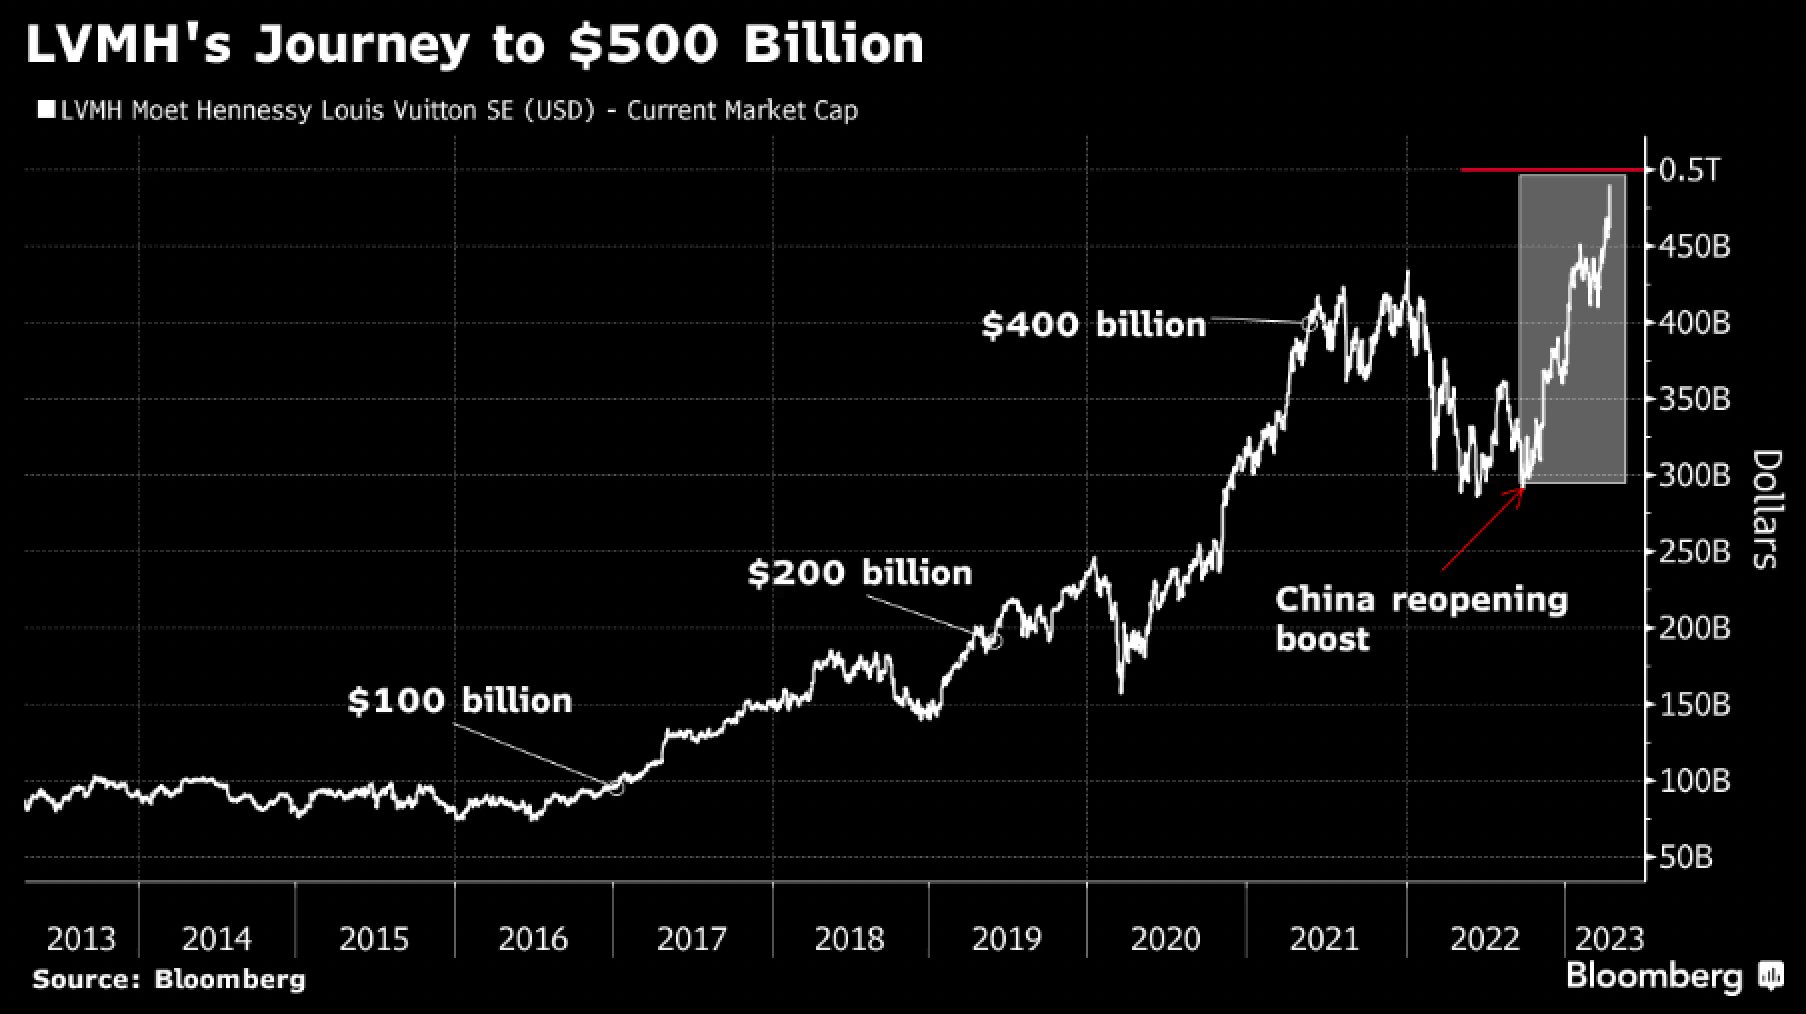 Holger Zschaepitz on X: #LVMH's market value surpassed $500bn, becoming  1st European company to reach that milestone, thx to booming sales of  luxury goods in China & a strengthening Euro, BBG reports.